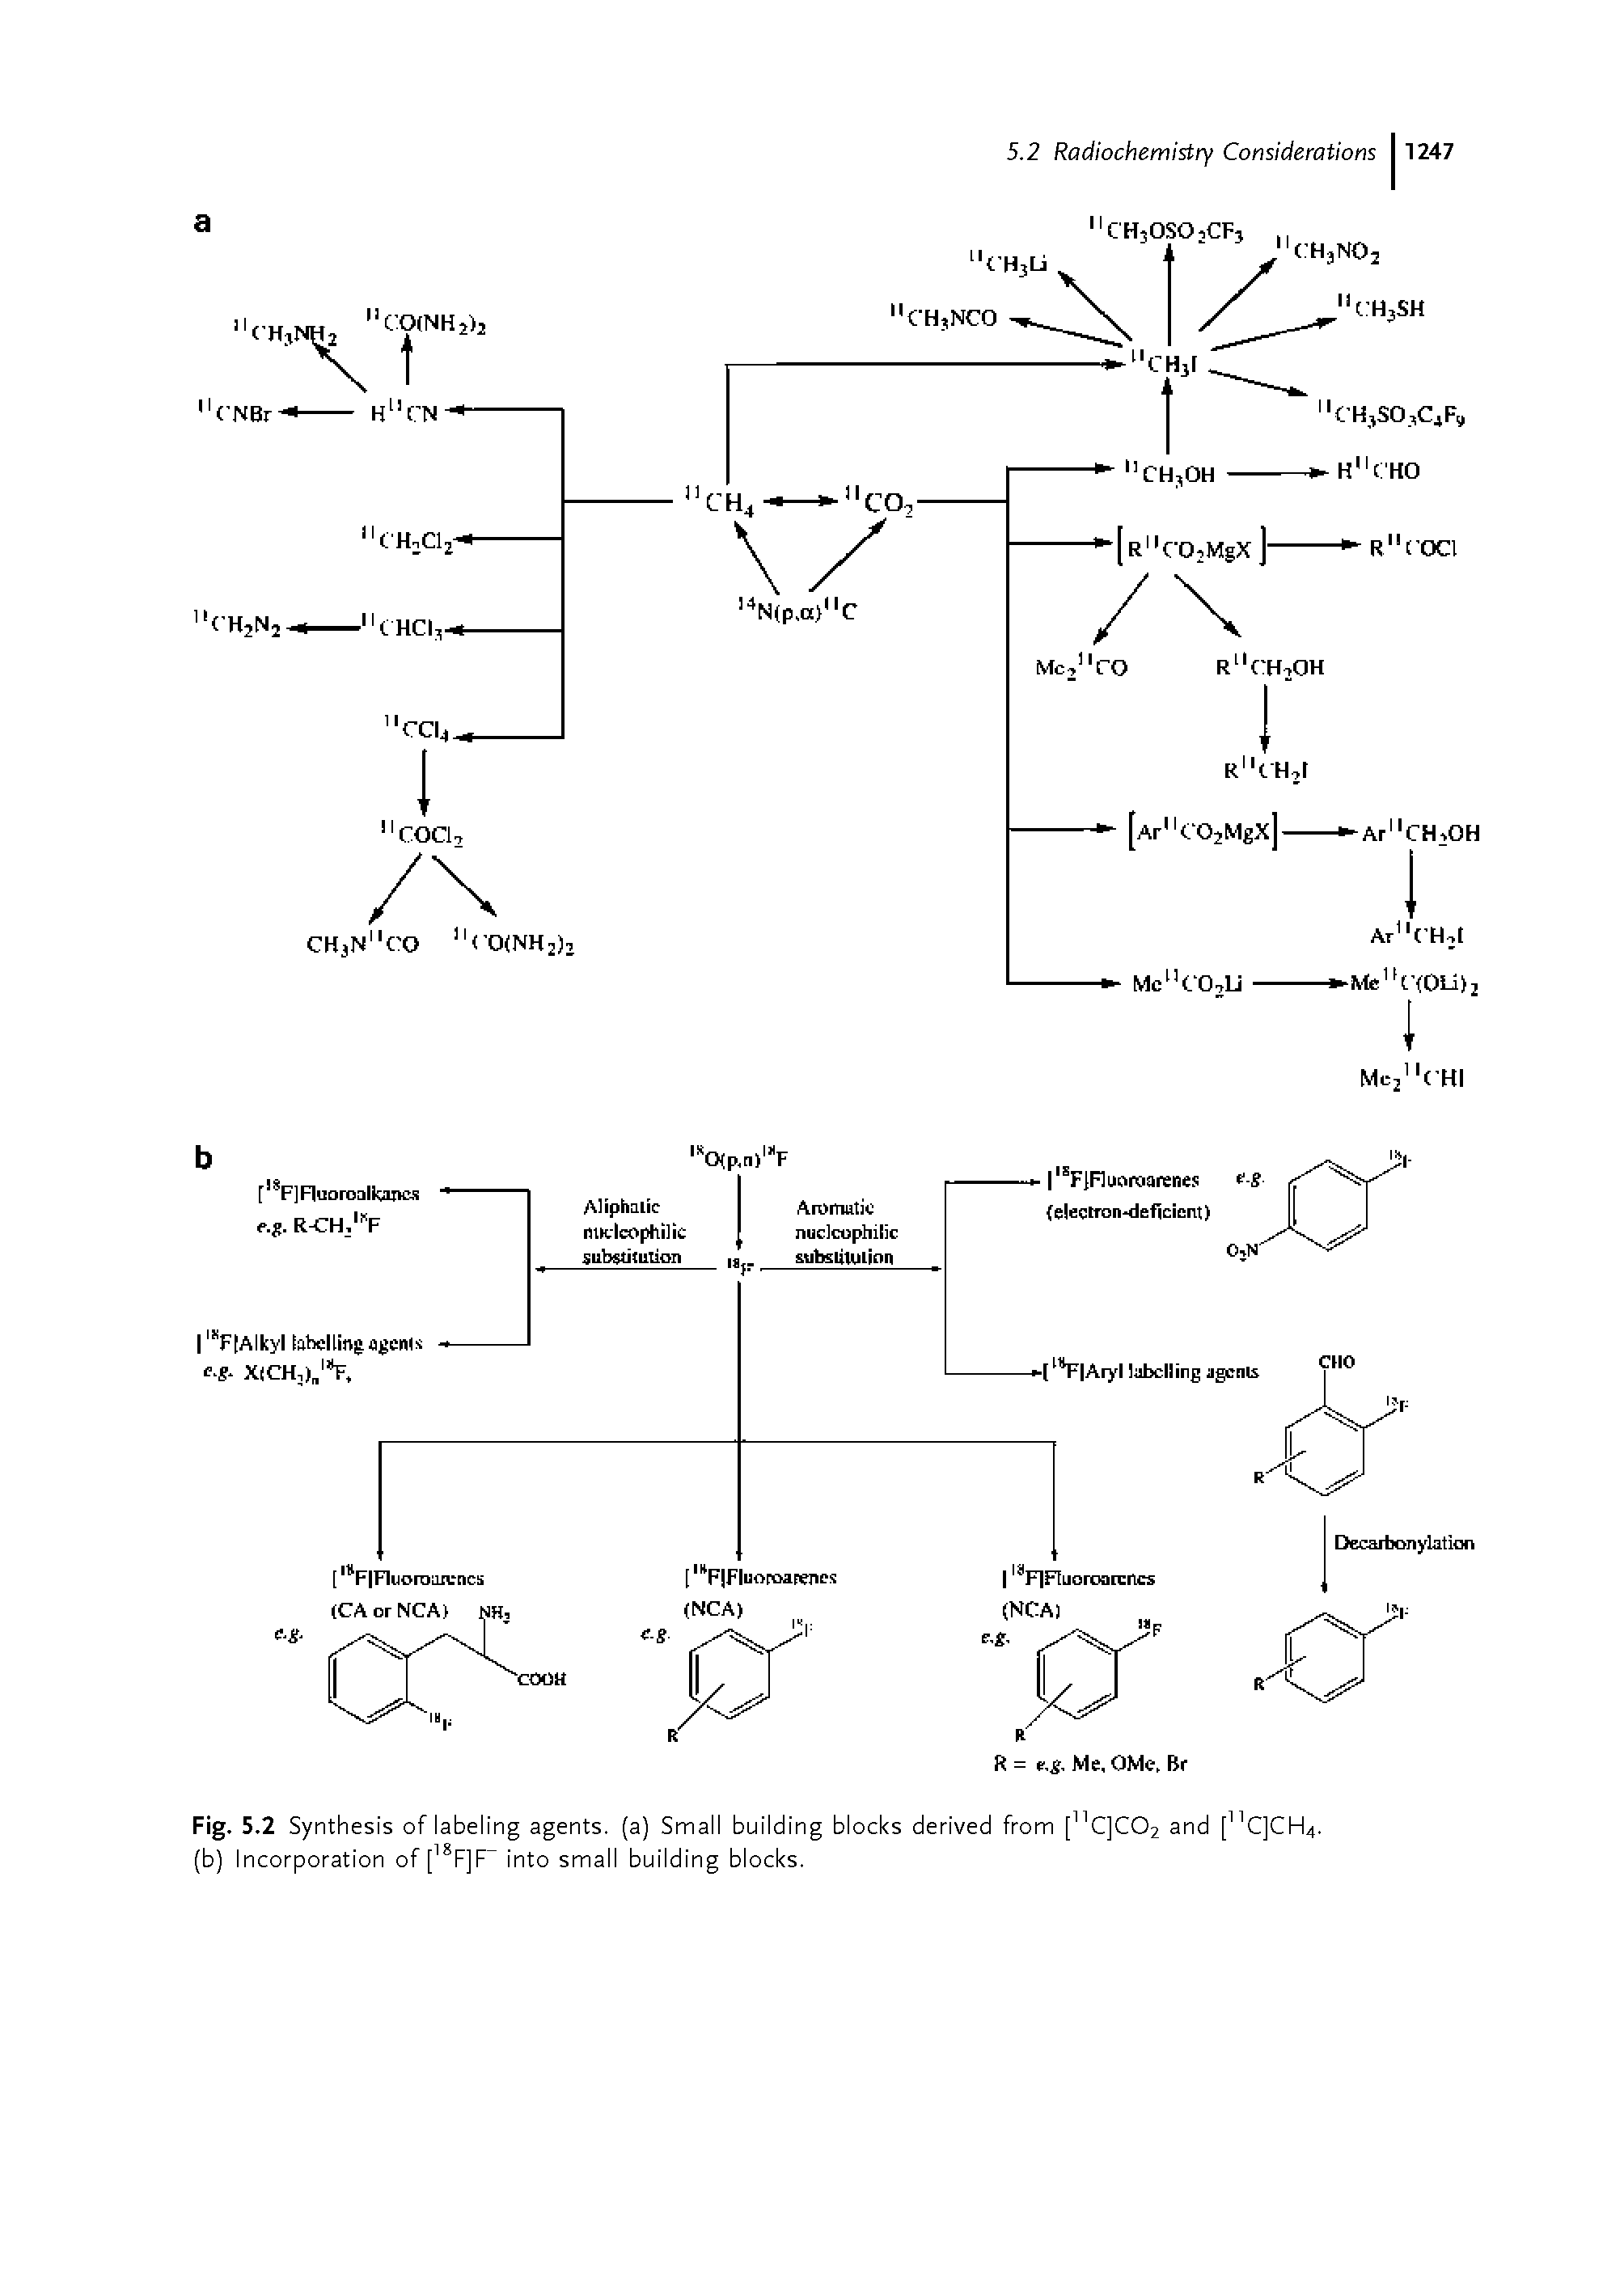 Fig. 5.2 Synthesis of labeling agents, (a) Small building blocks derived from ["C]C02 and [ C]CH4. (b) Incorporation of [ F]F into small building blocks.